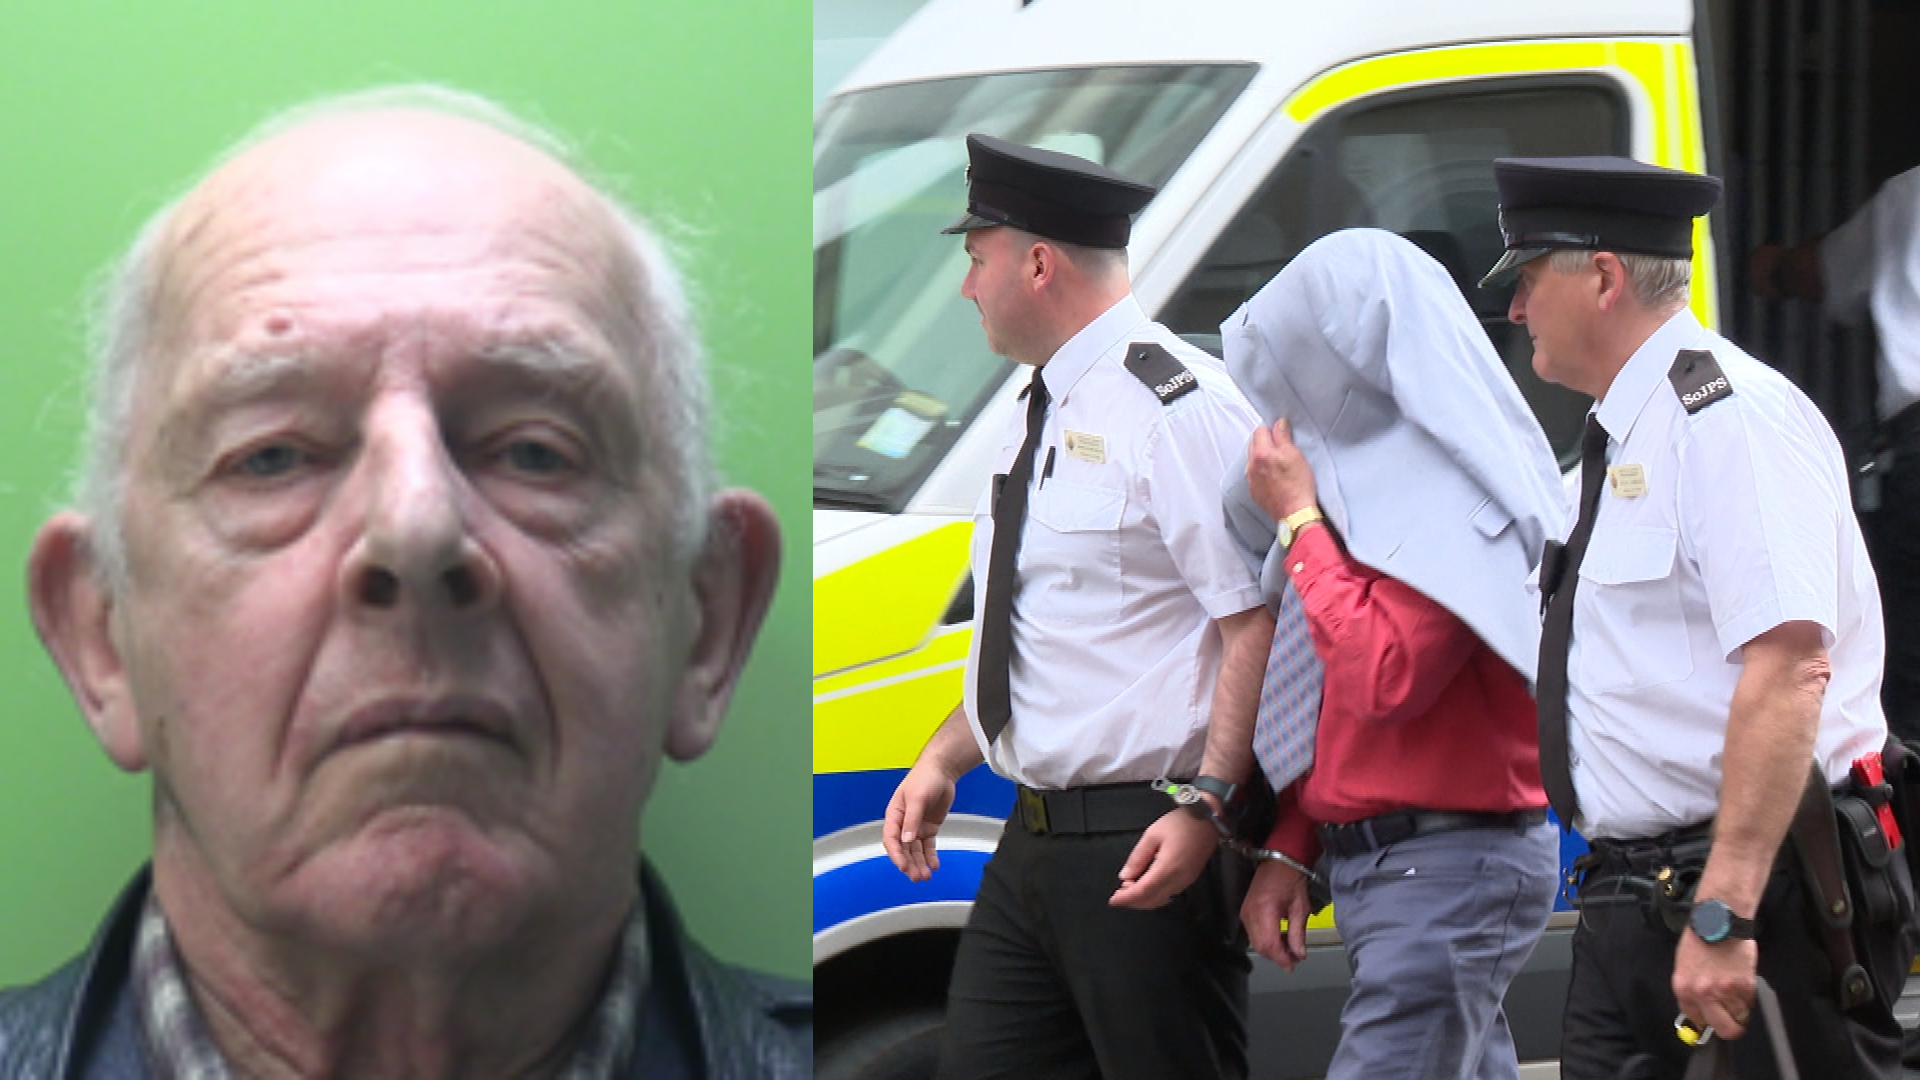 Former Jersey honorary police officer jailed for making and sharing